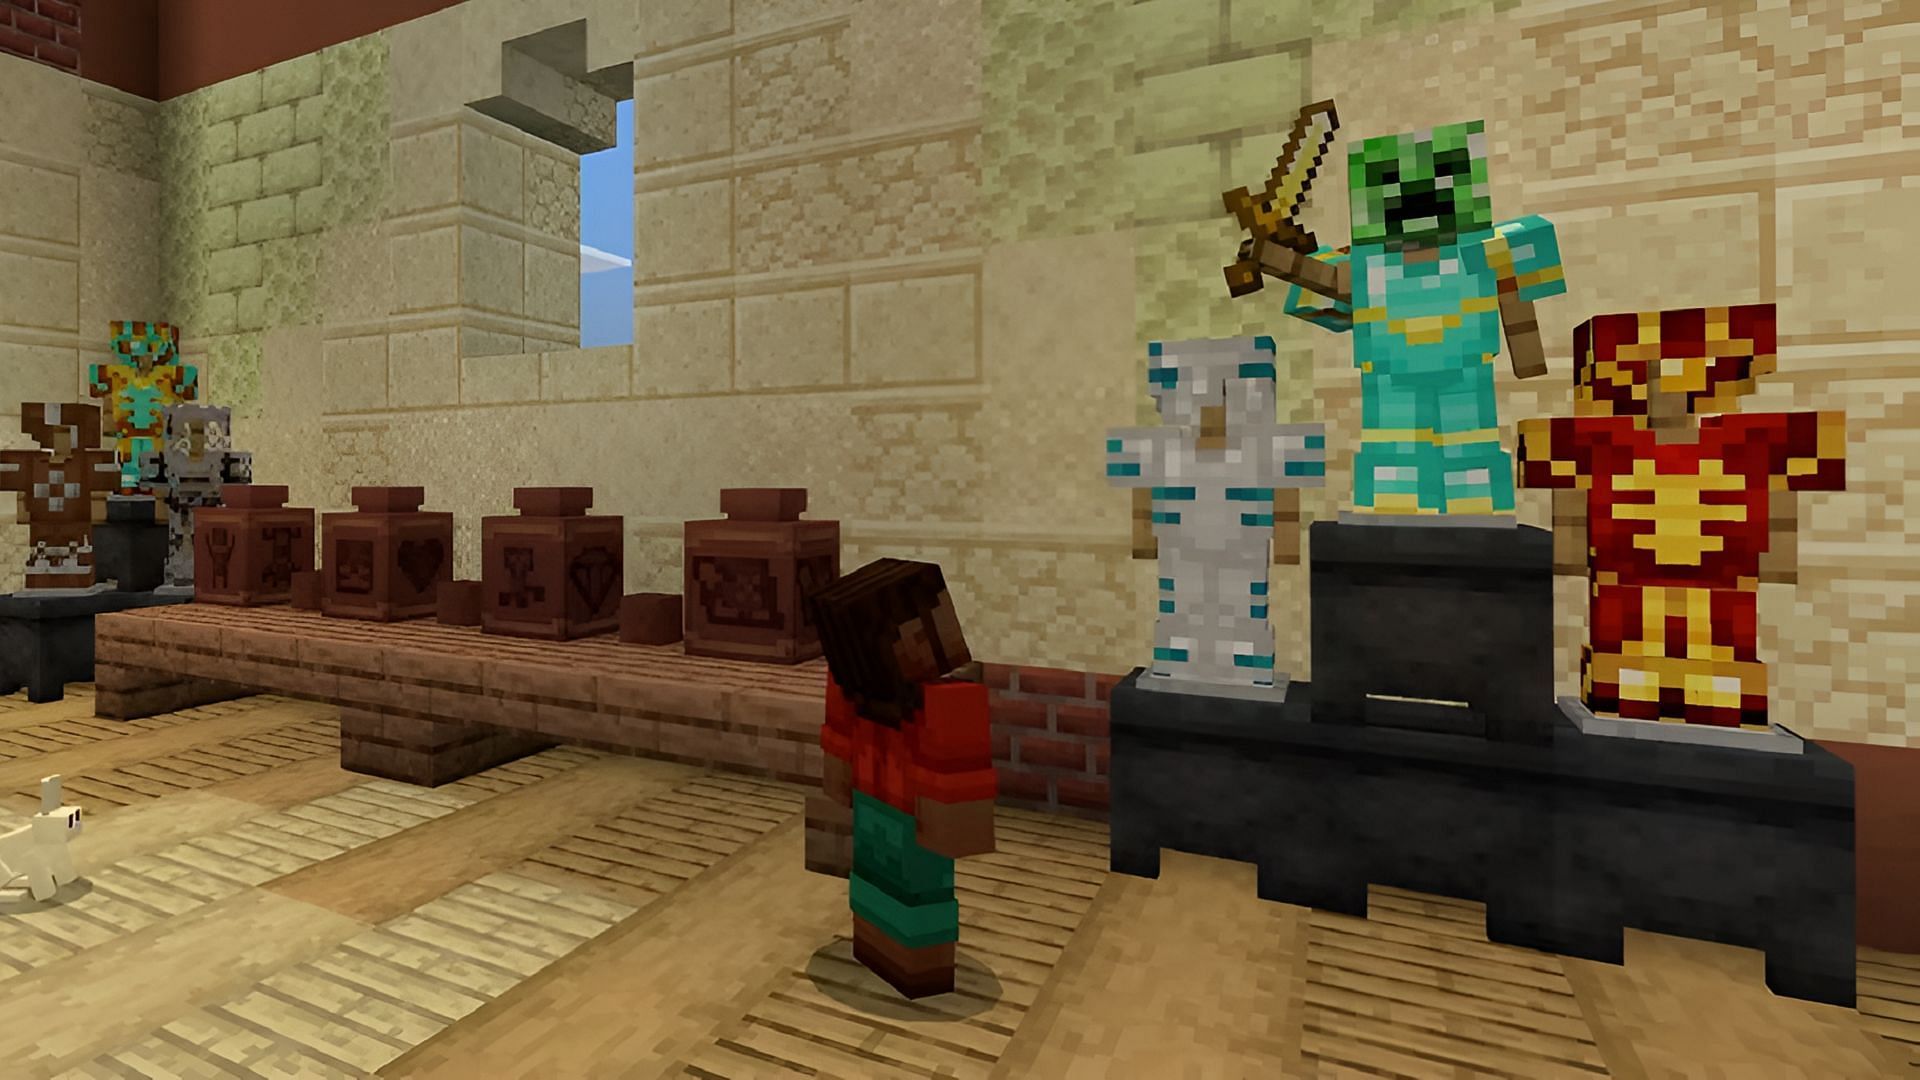 A player gazes at armor on a display in Minecraft.